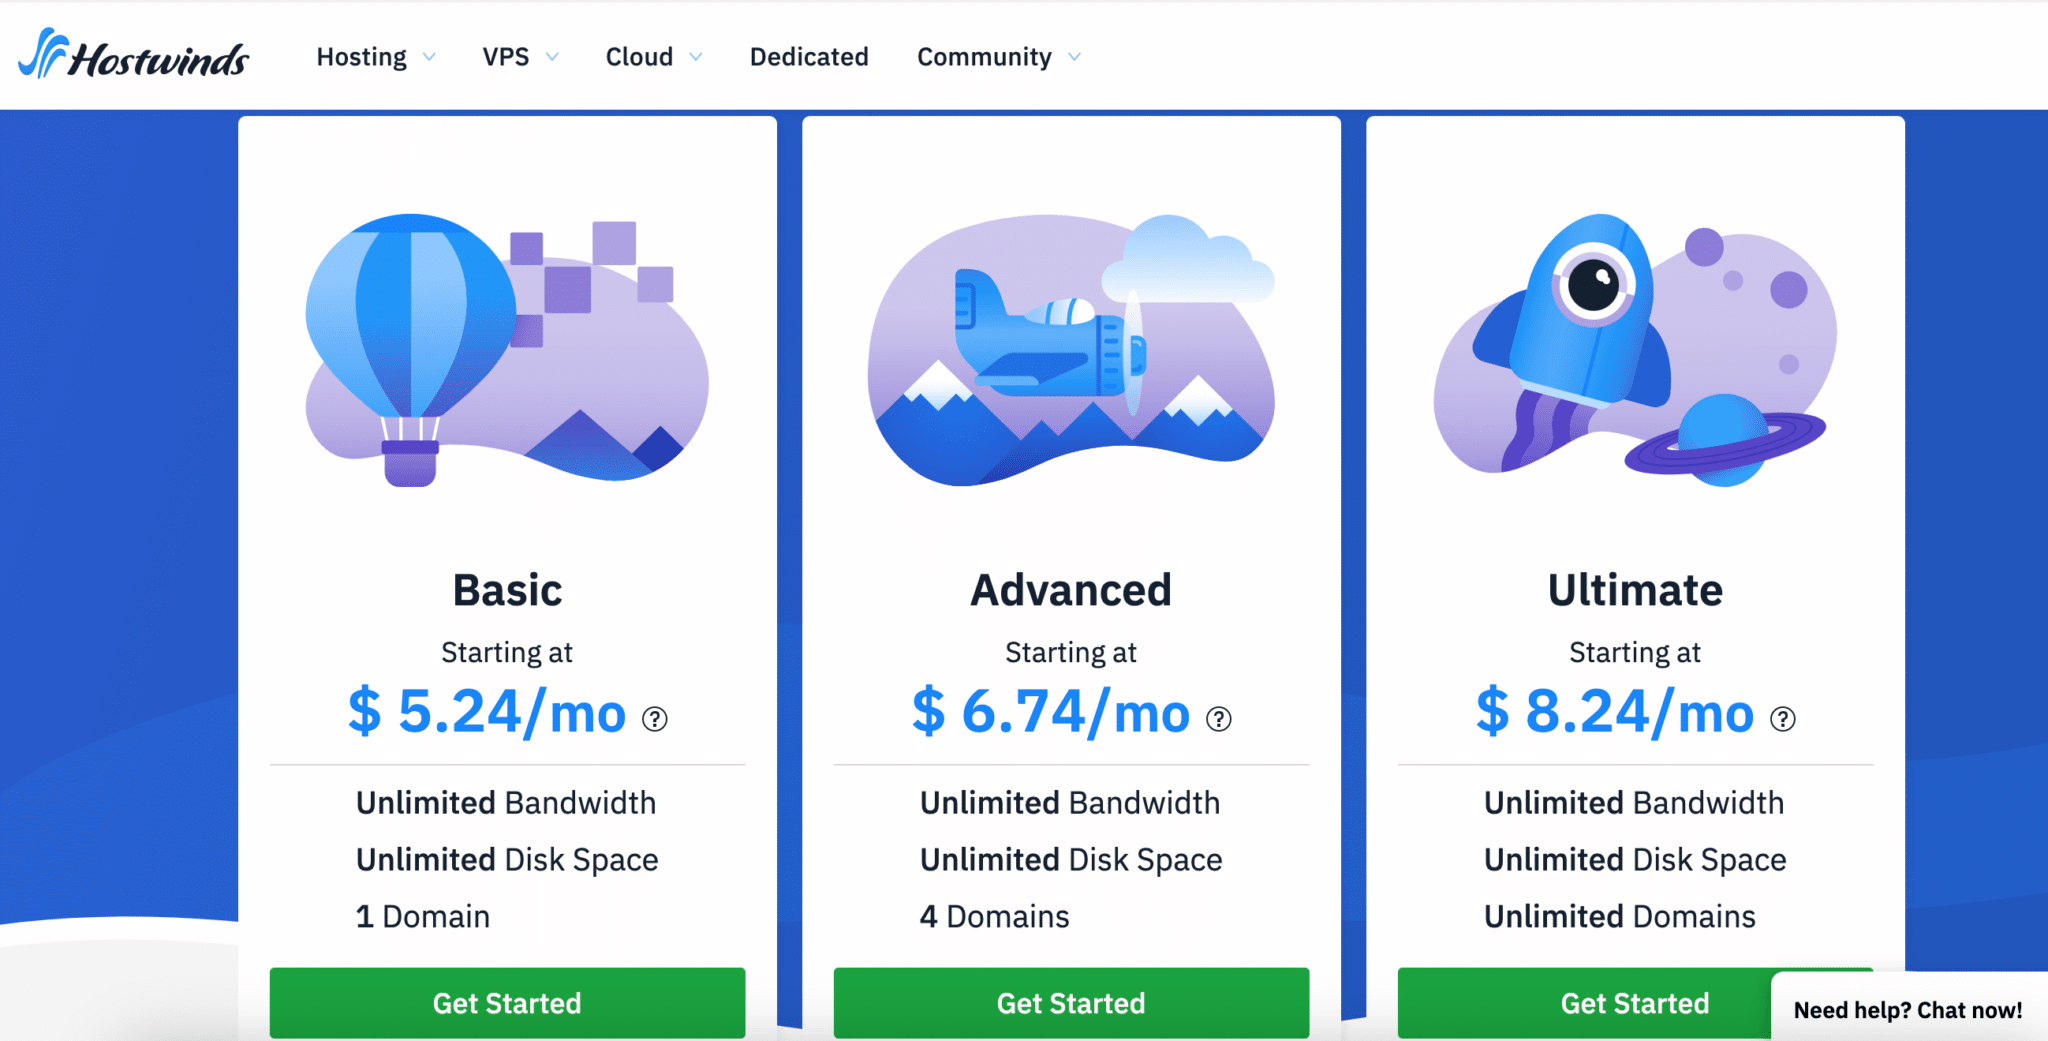 AccuWeb vs. Hostwinds; Hostwinds shared pricing